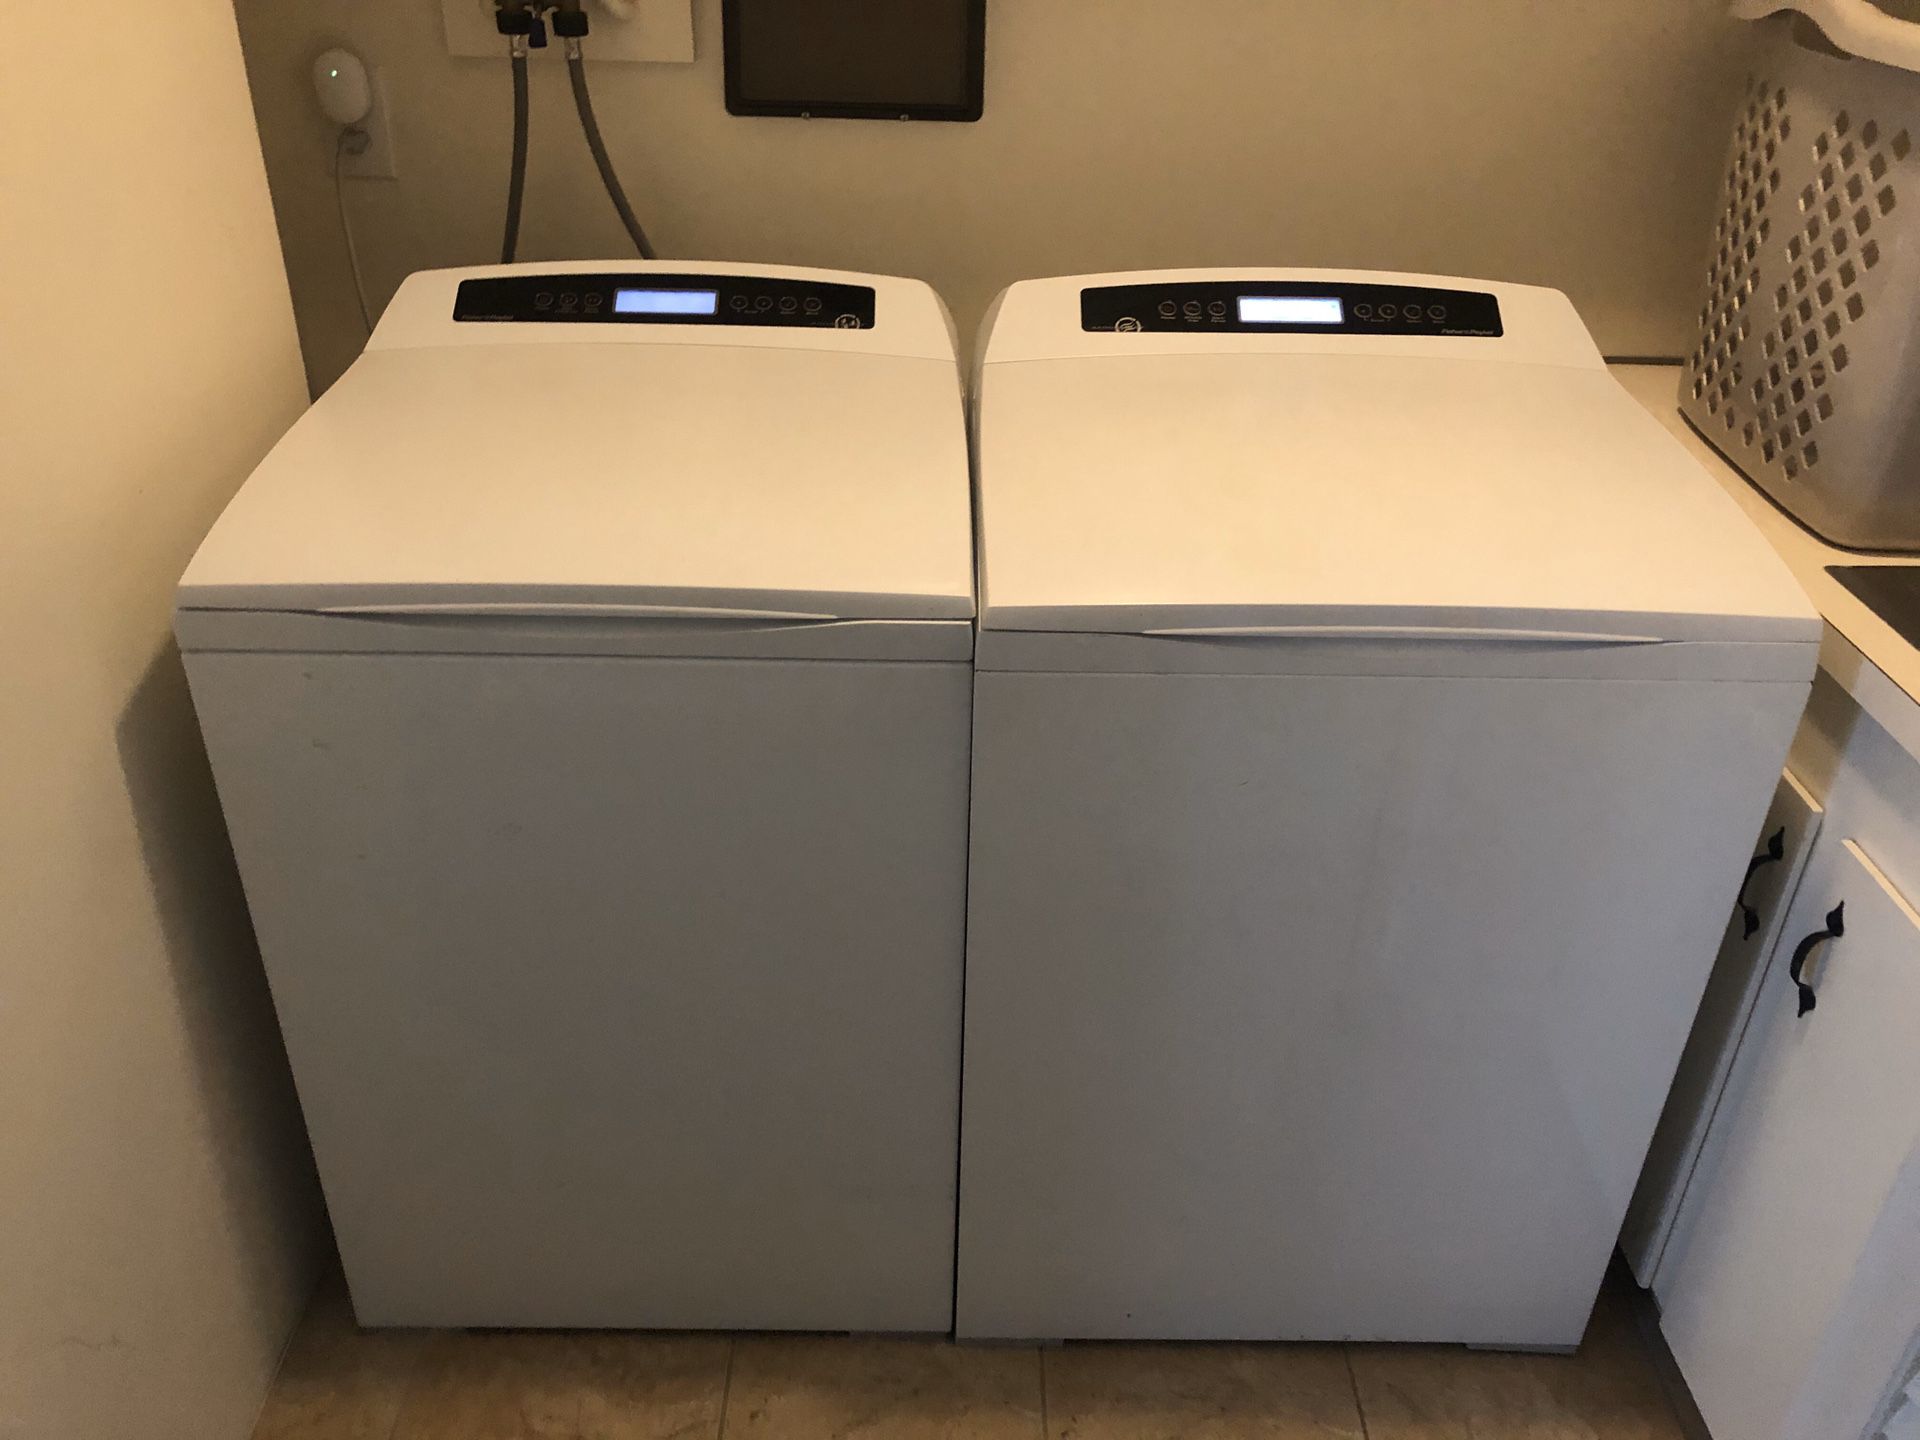 Fisher & Paykel washer and dryer